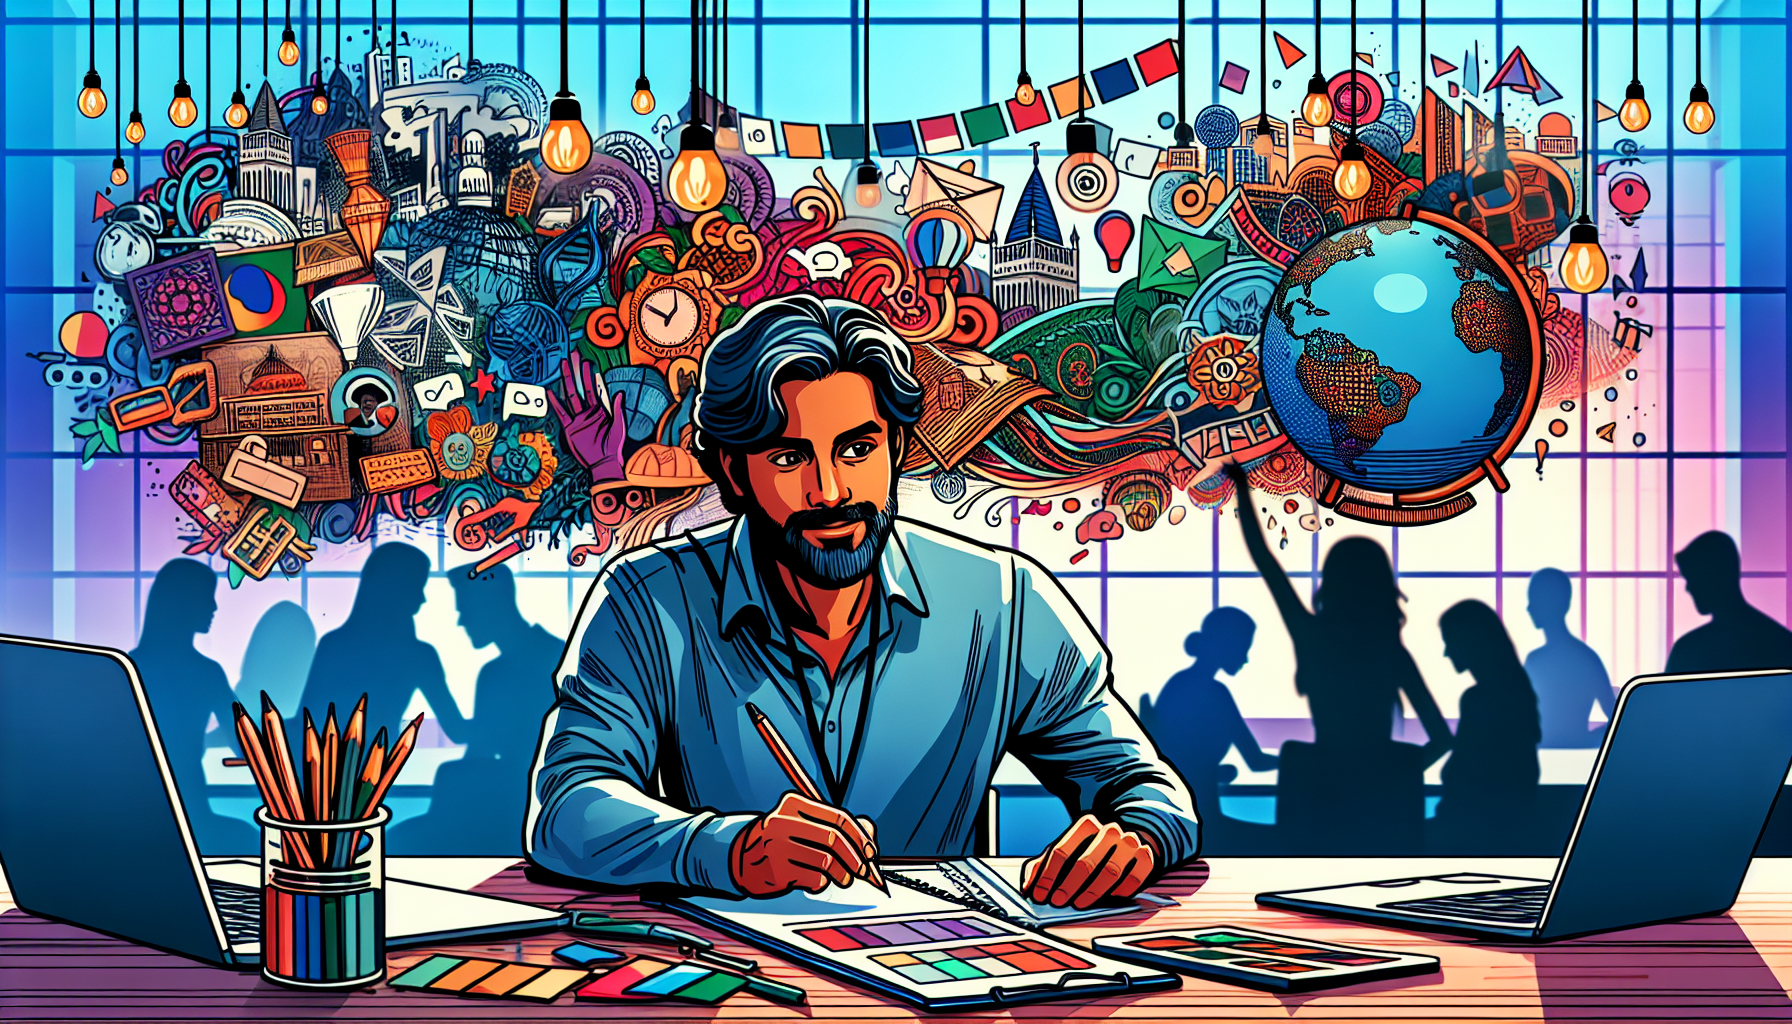 Create a vivid illustration representing the concept of Global Screenwriting. Show an artist at his desk adapting a storyboard that seems to be for an animated film, with different elements suggesting an international perspective. For instance, use symbols or iconic landmarks from different geographies subtly appearing in his ideas. The artist is Middle-Eastern male. The style should be colorful and contemporary, but no text should be included in the image. Across the room, a South Asian female colleague is seen brainstorming ideas with a color palette in her hand.